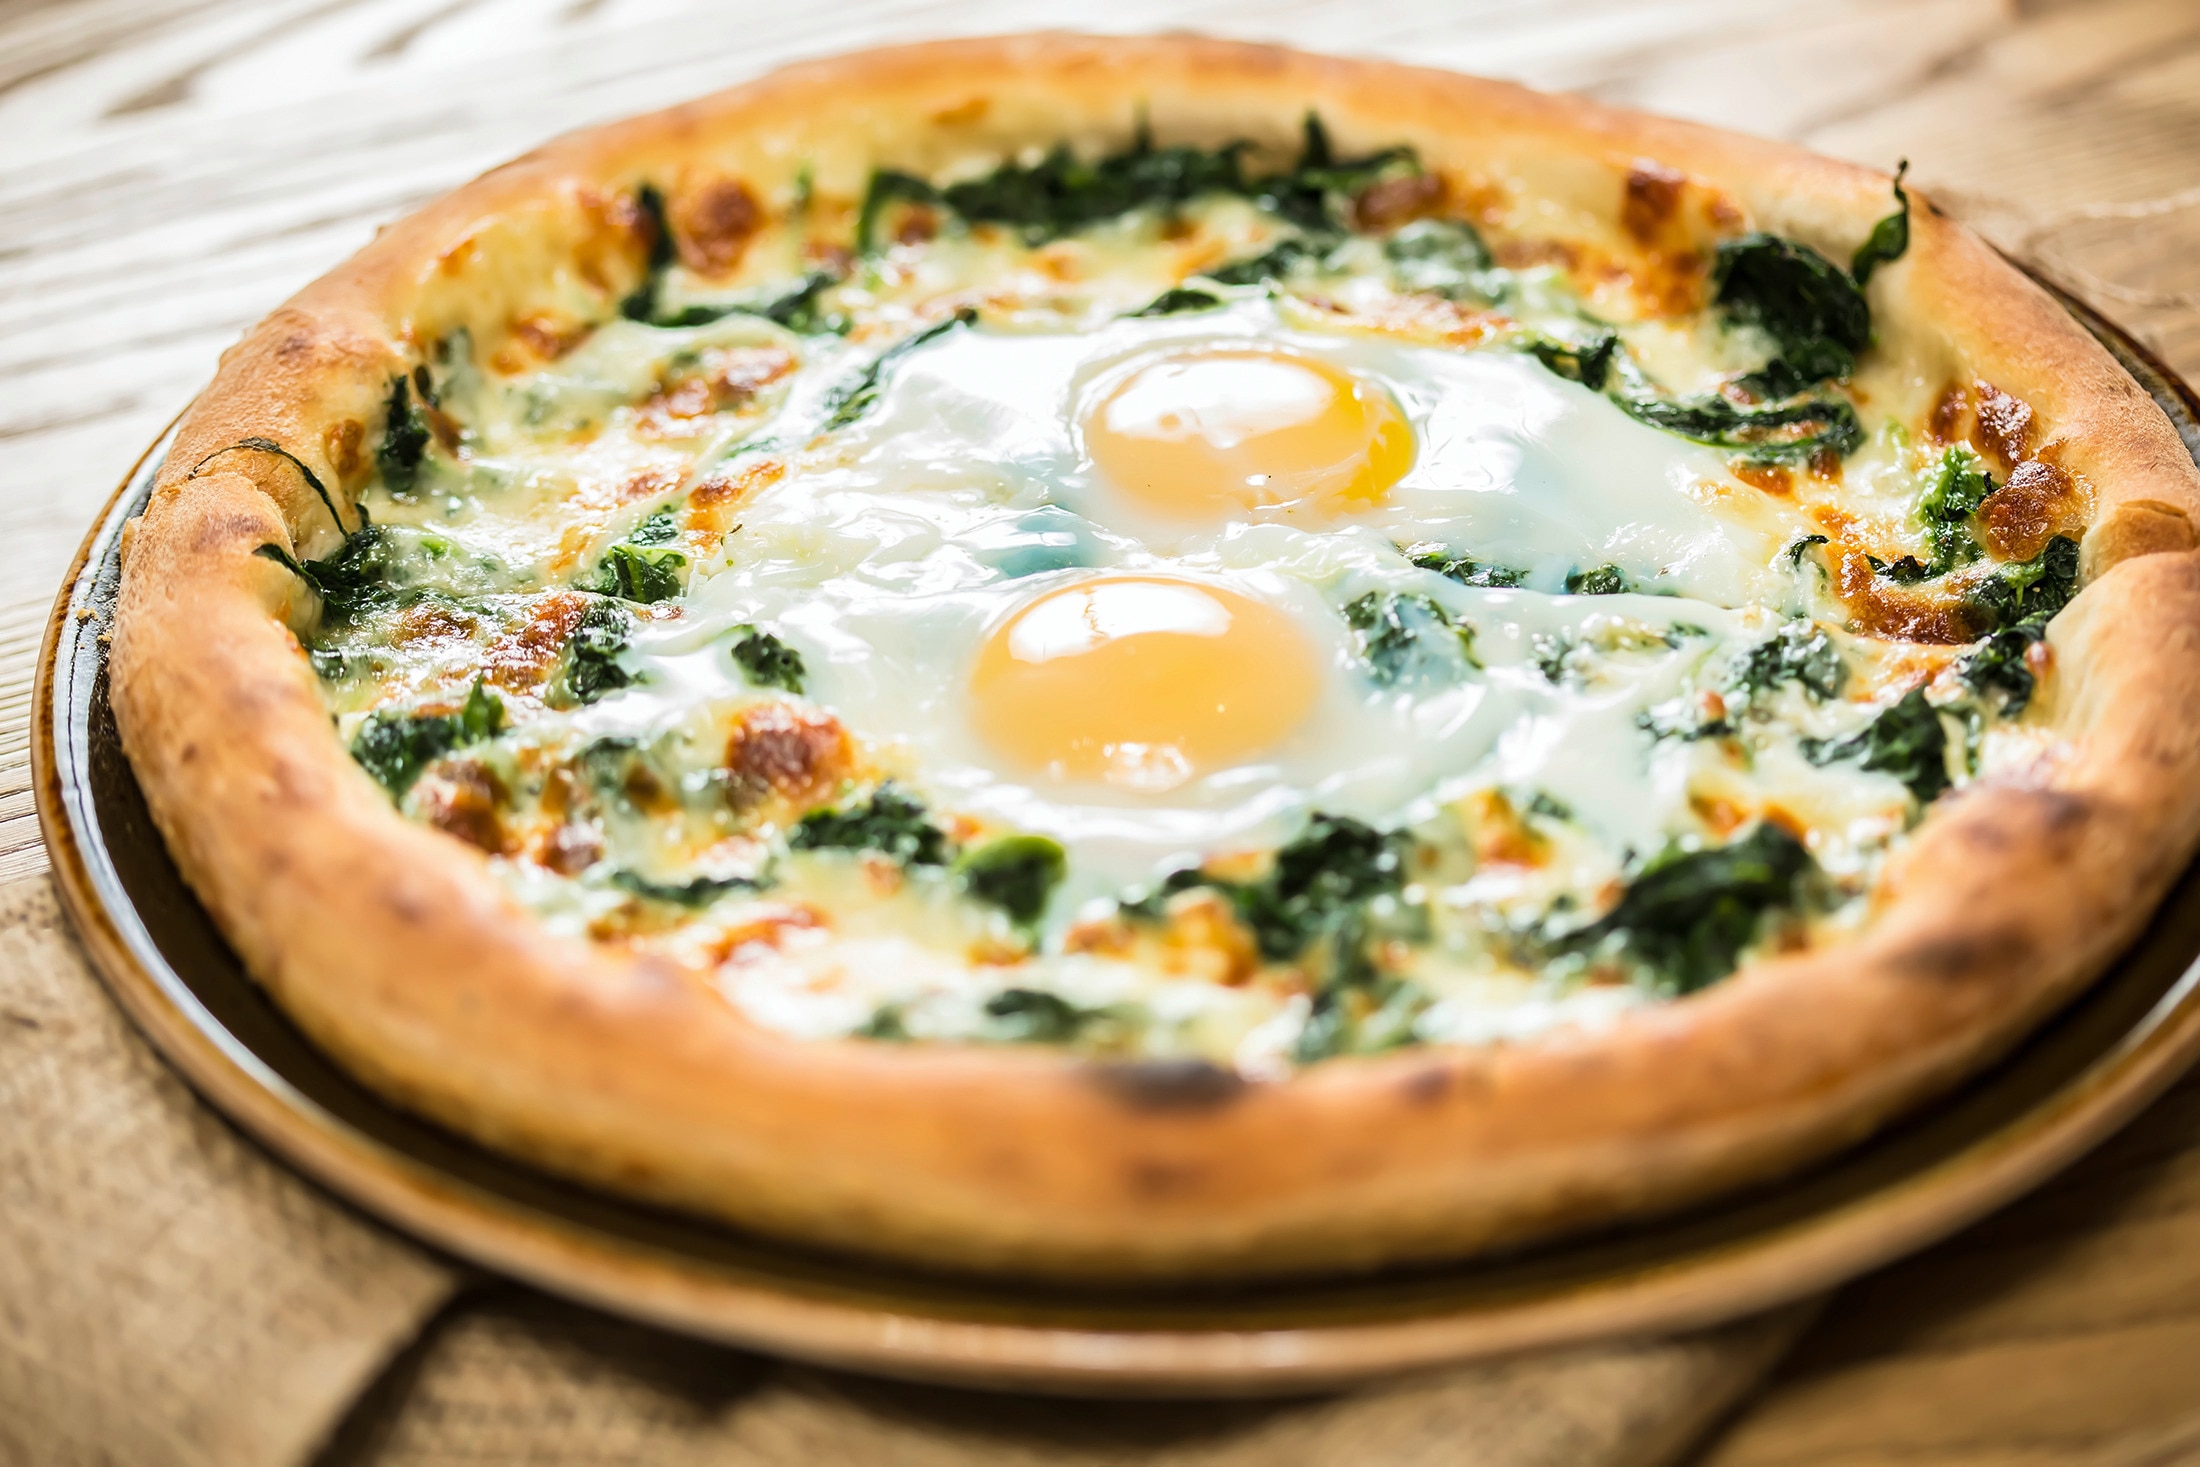 A Margherita pizza with arugula and two fried eggs